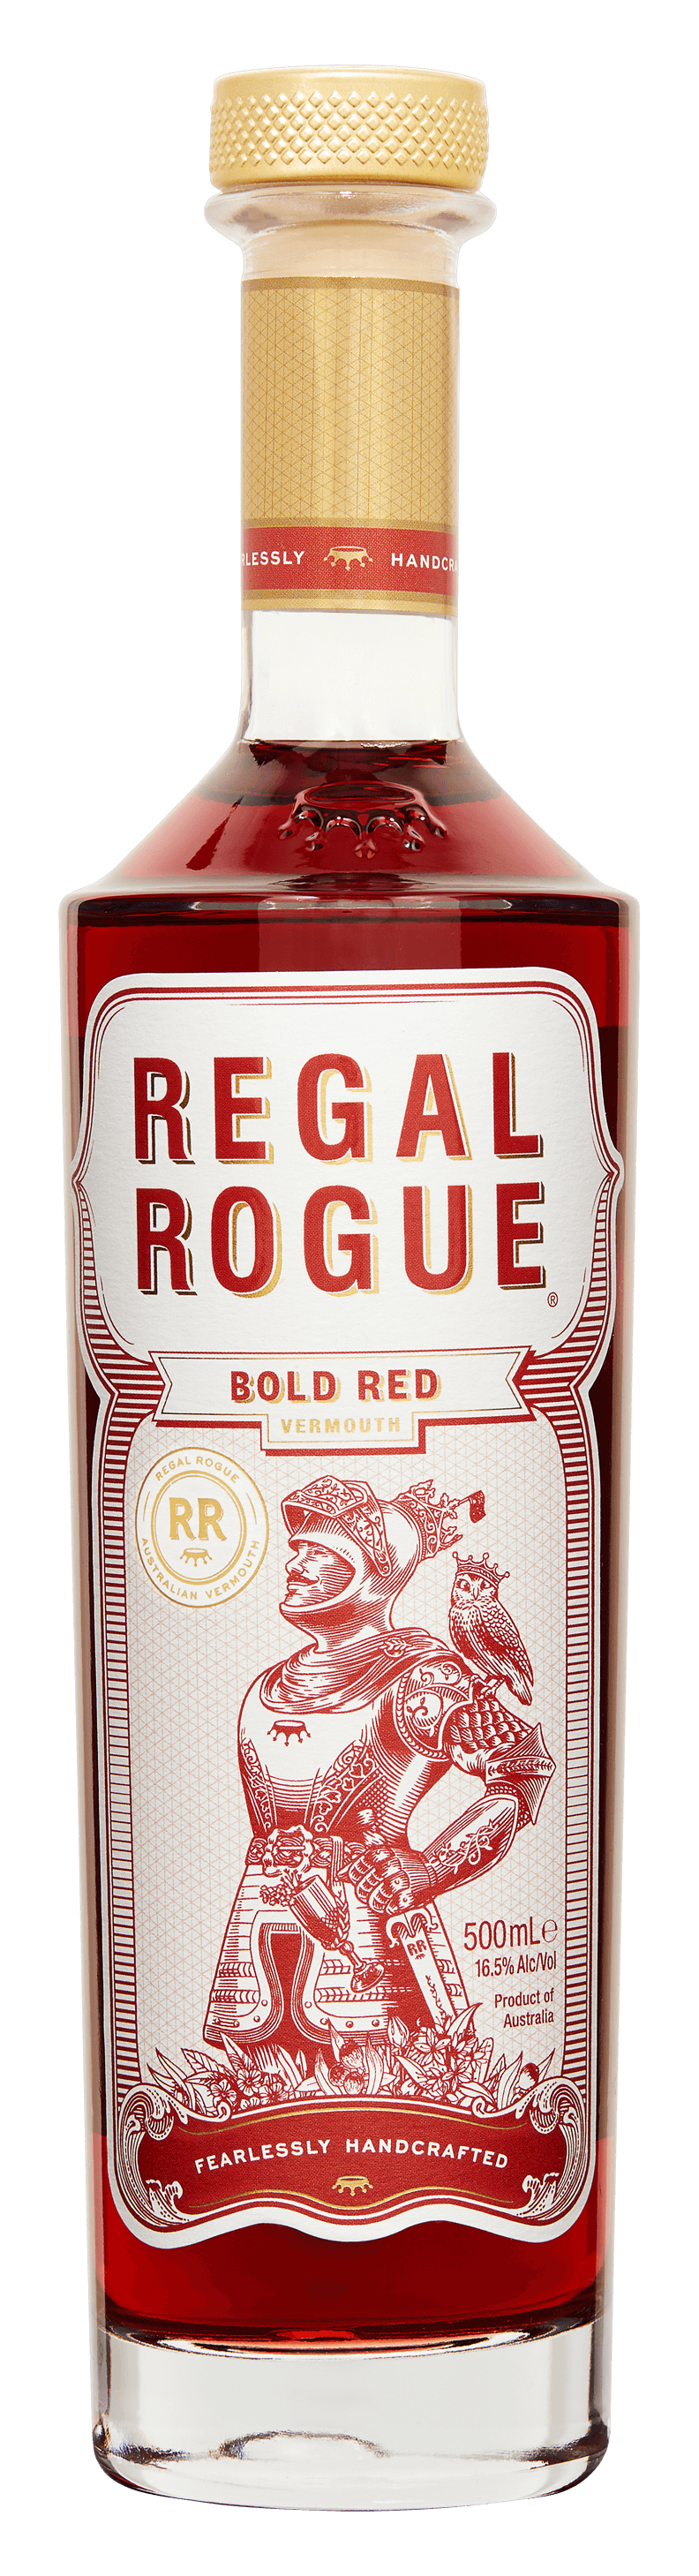 Regal Rogue Bold Red